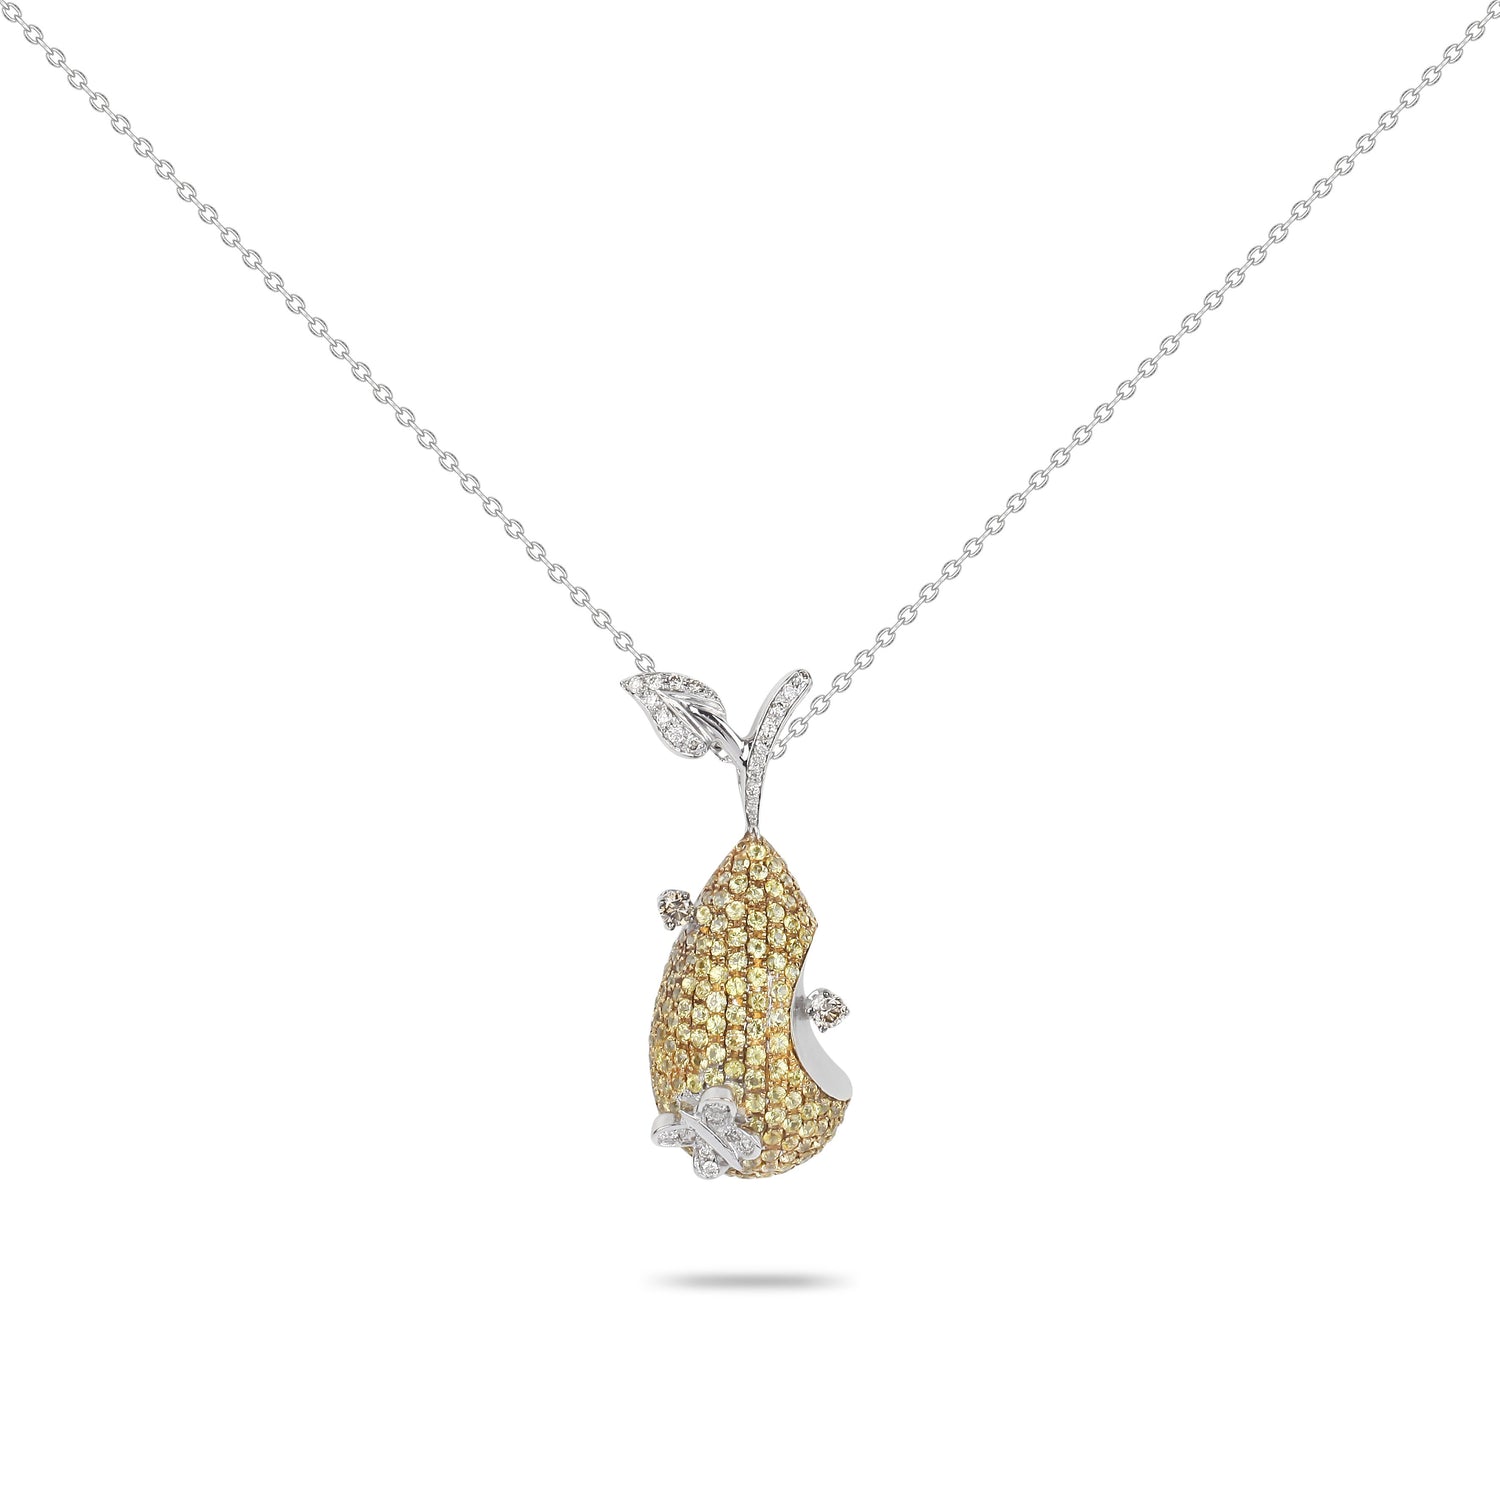 Pear Diamond Necklace | Necklaces with diamonds | Best Jewelry online